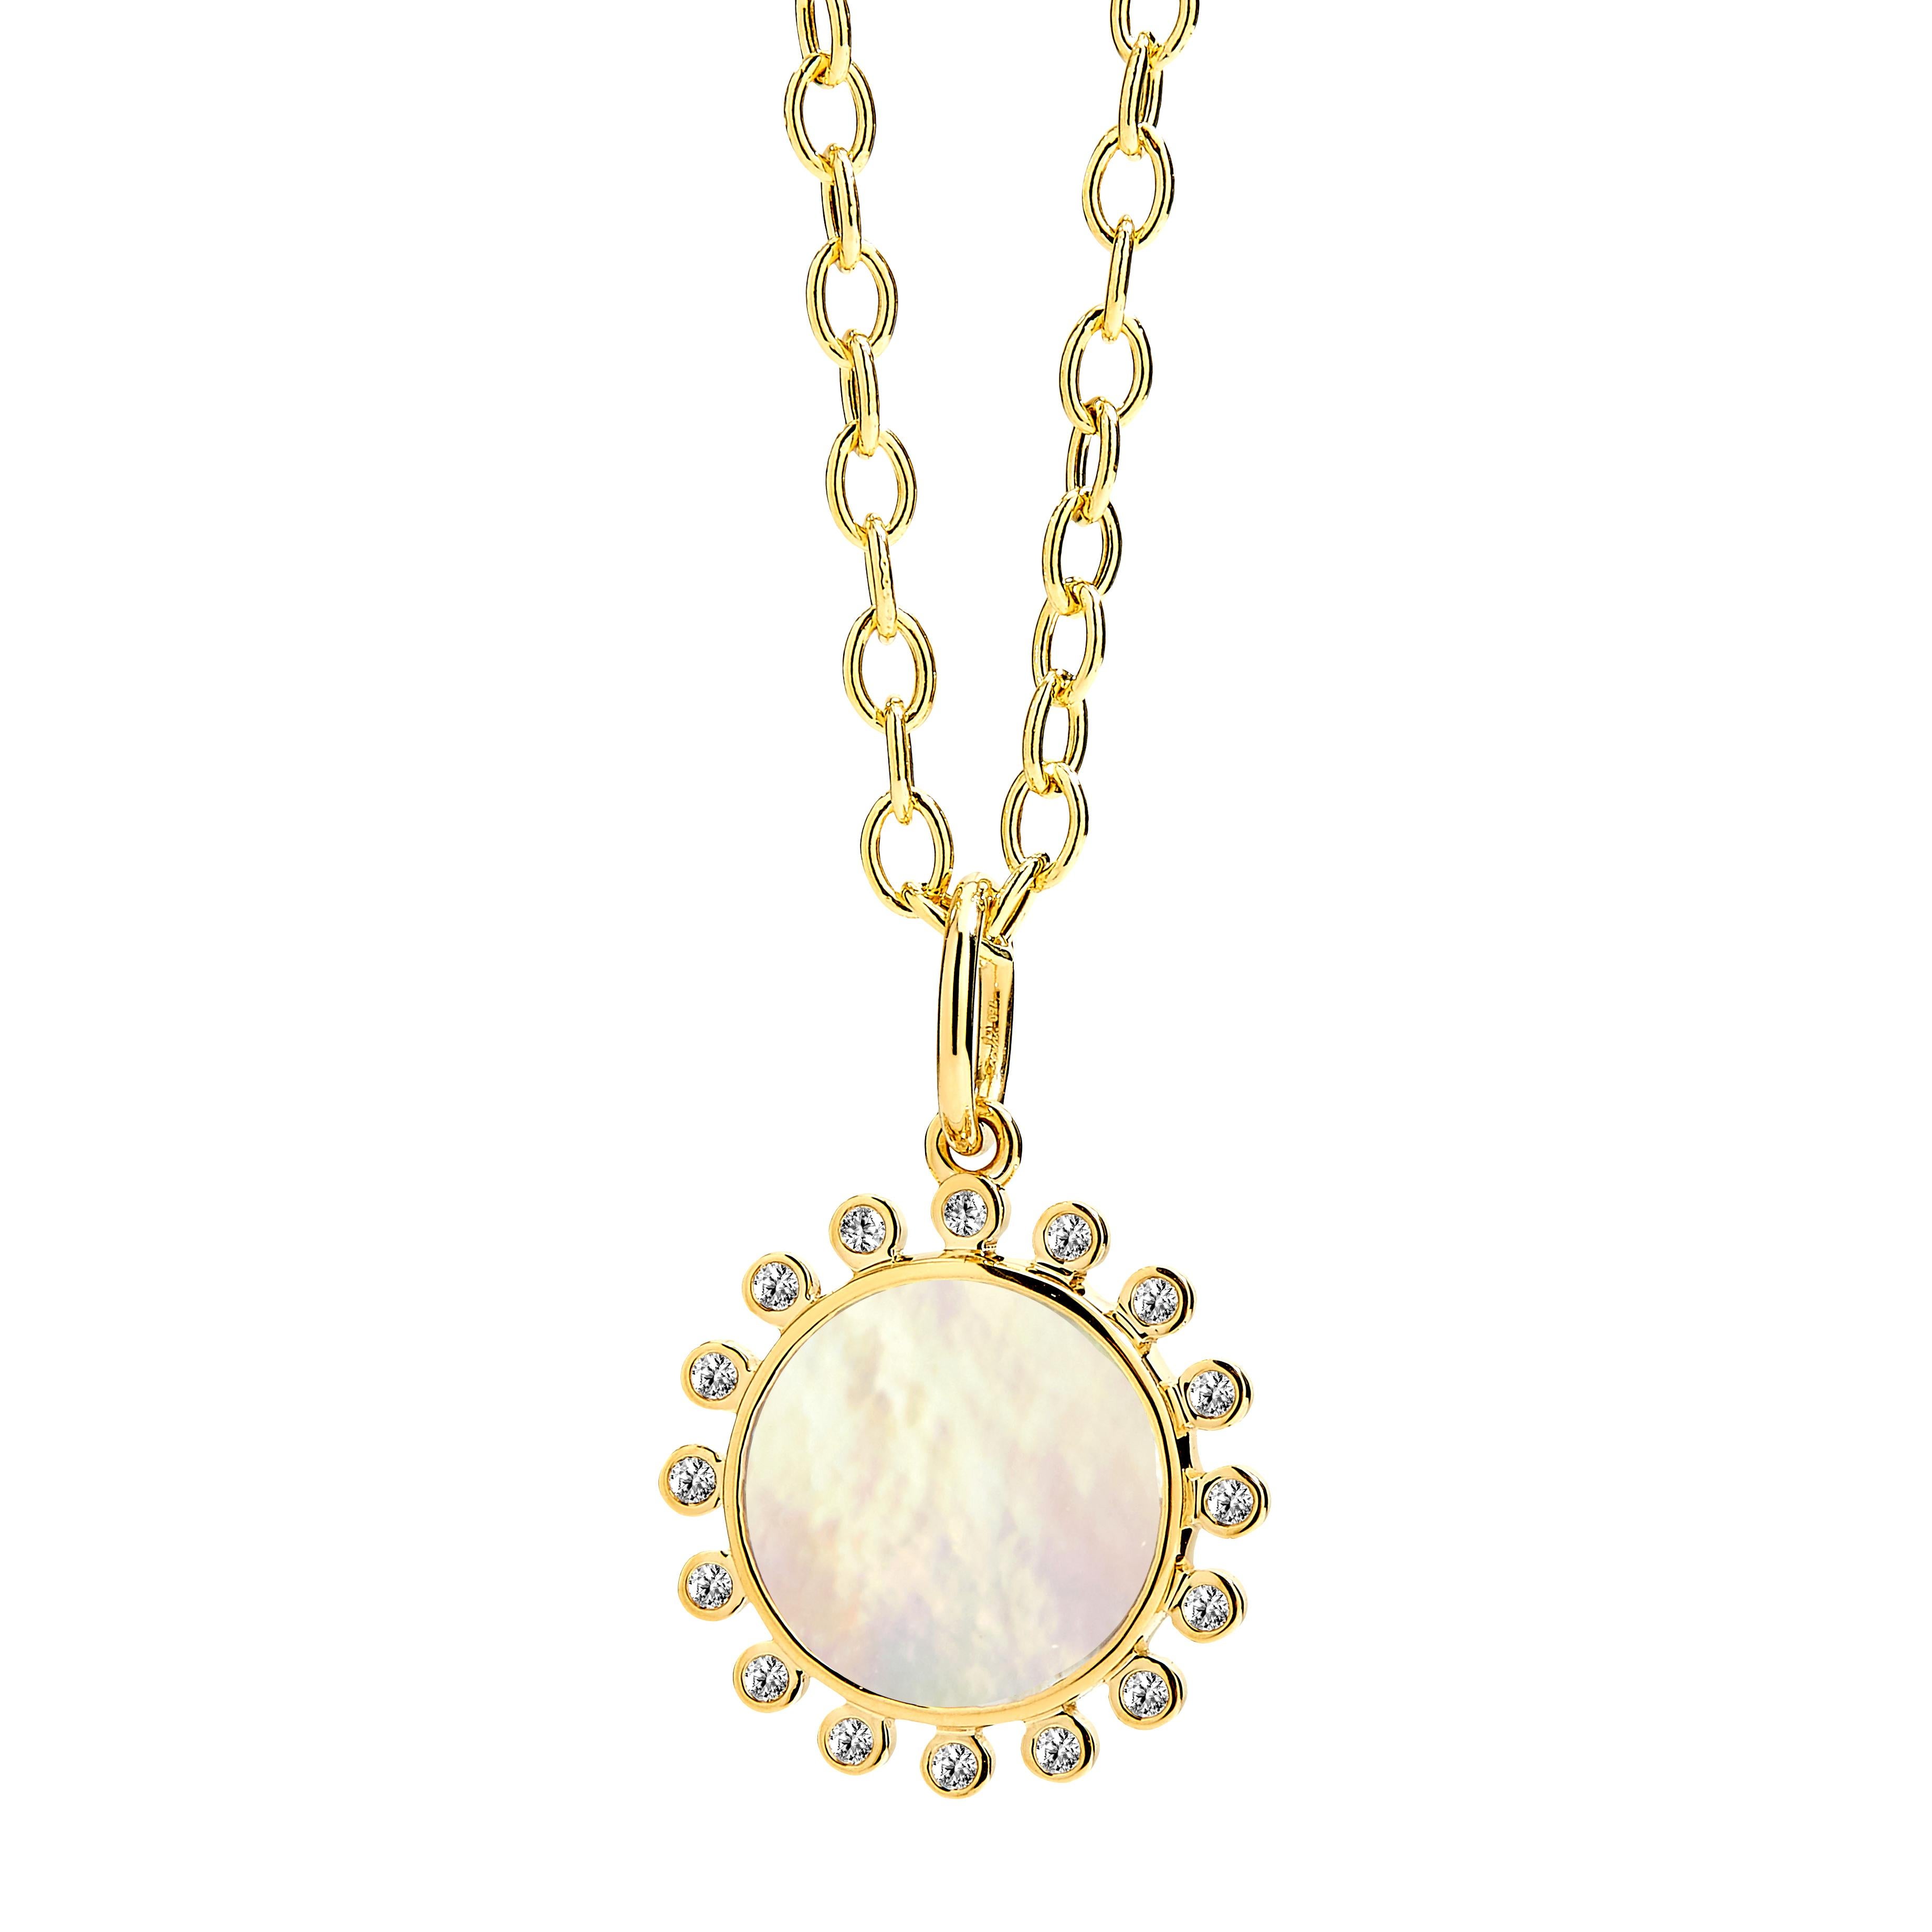 Created in 18kyg
Mother of pearl 2.5 cts approx
Diamonds 0.20 ct approx
Chain sold separately 
Limited edition

Exquisite in 18 karat yellow gold, this limited edition pendant features an impressive mother of pearl of about 2.5 carats and 0.20